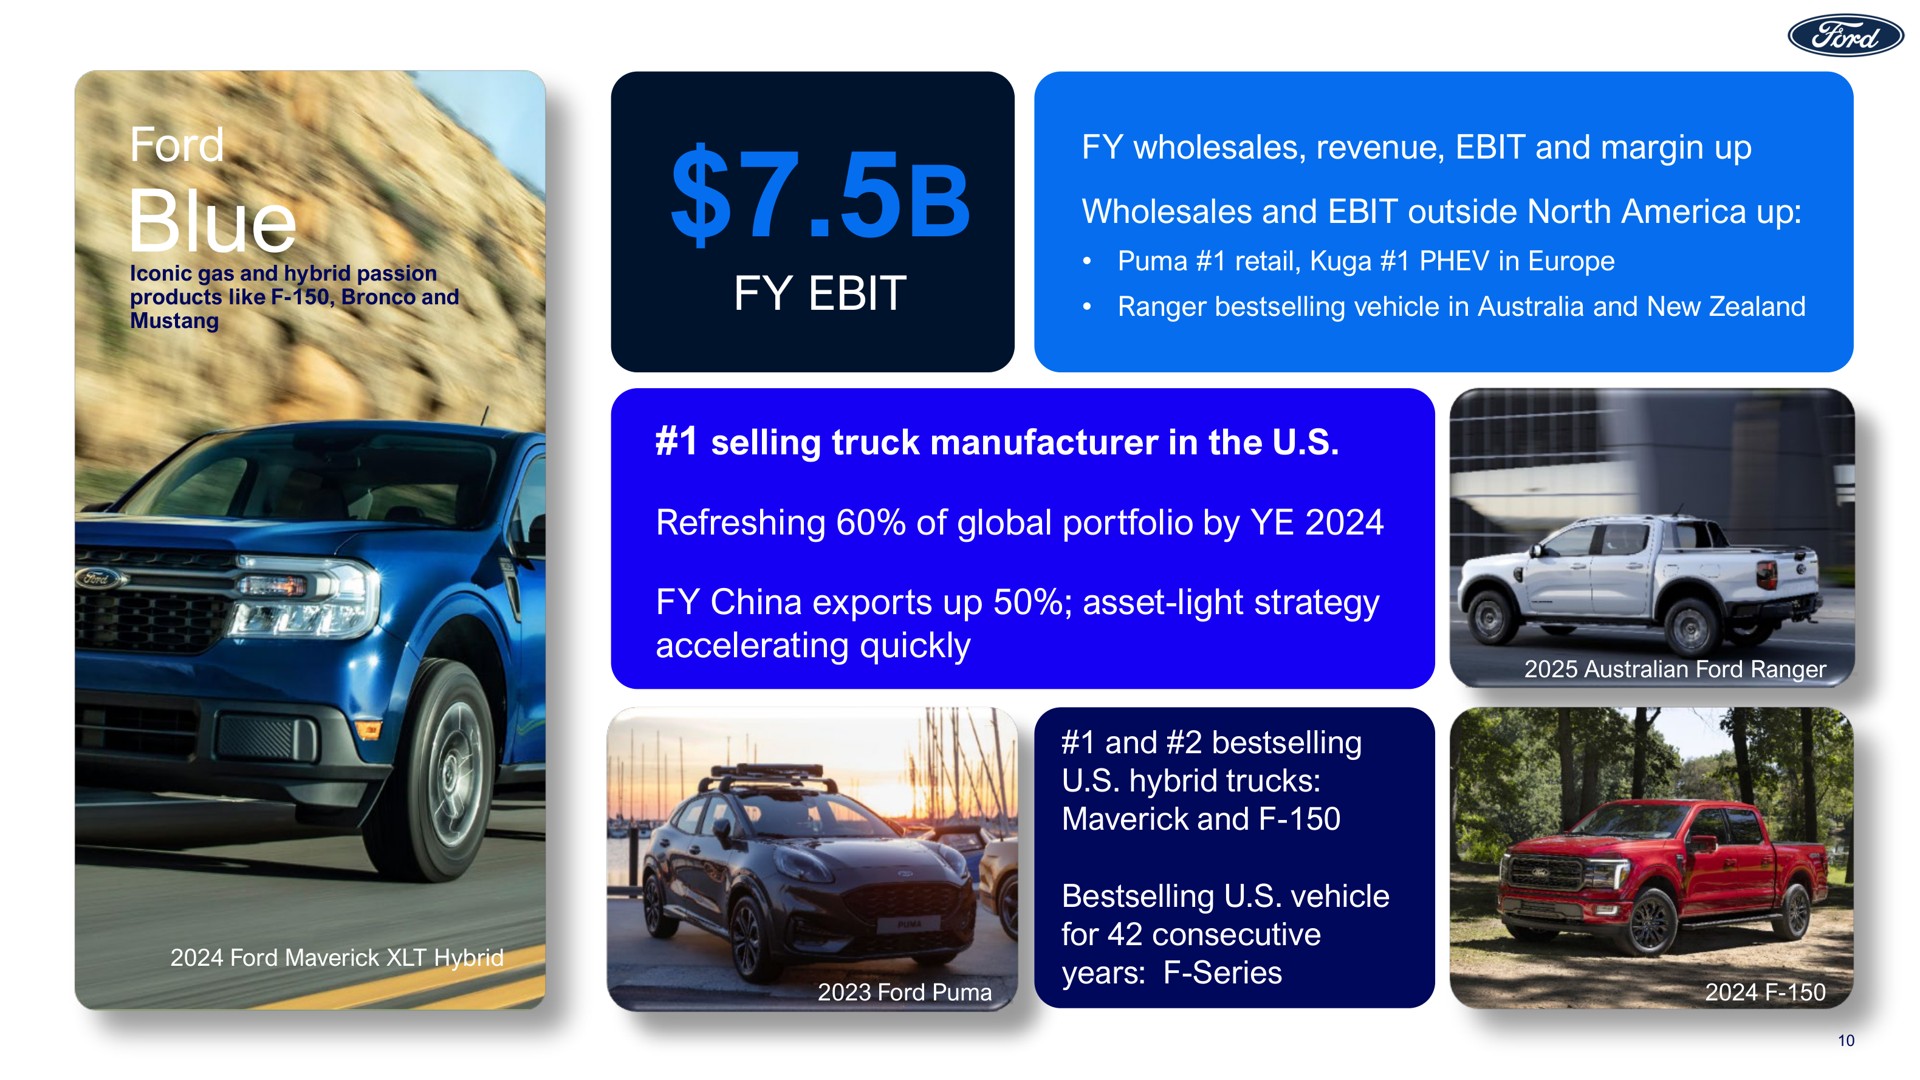 ford blue selling truck manufacturer in the refreshing of global portfolio by china exports up asset light strategy accelerating quickly | Ford